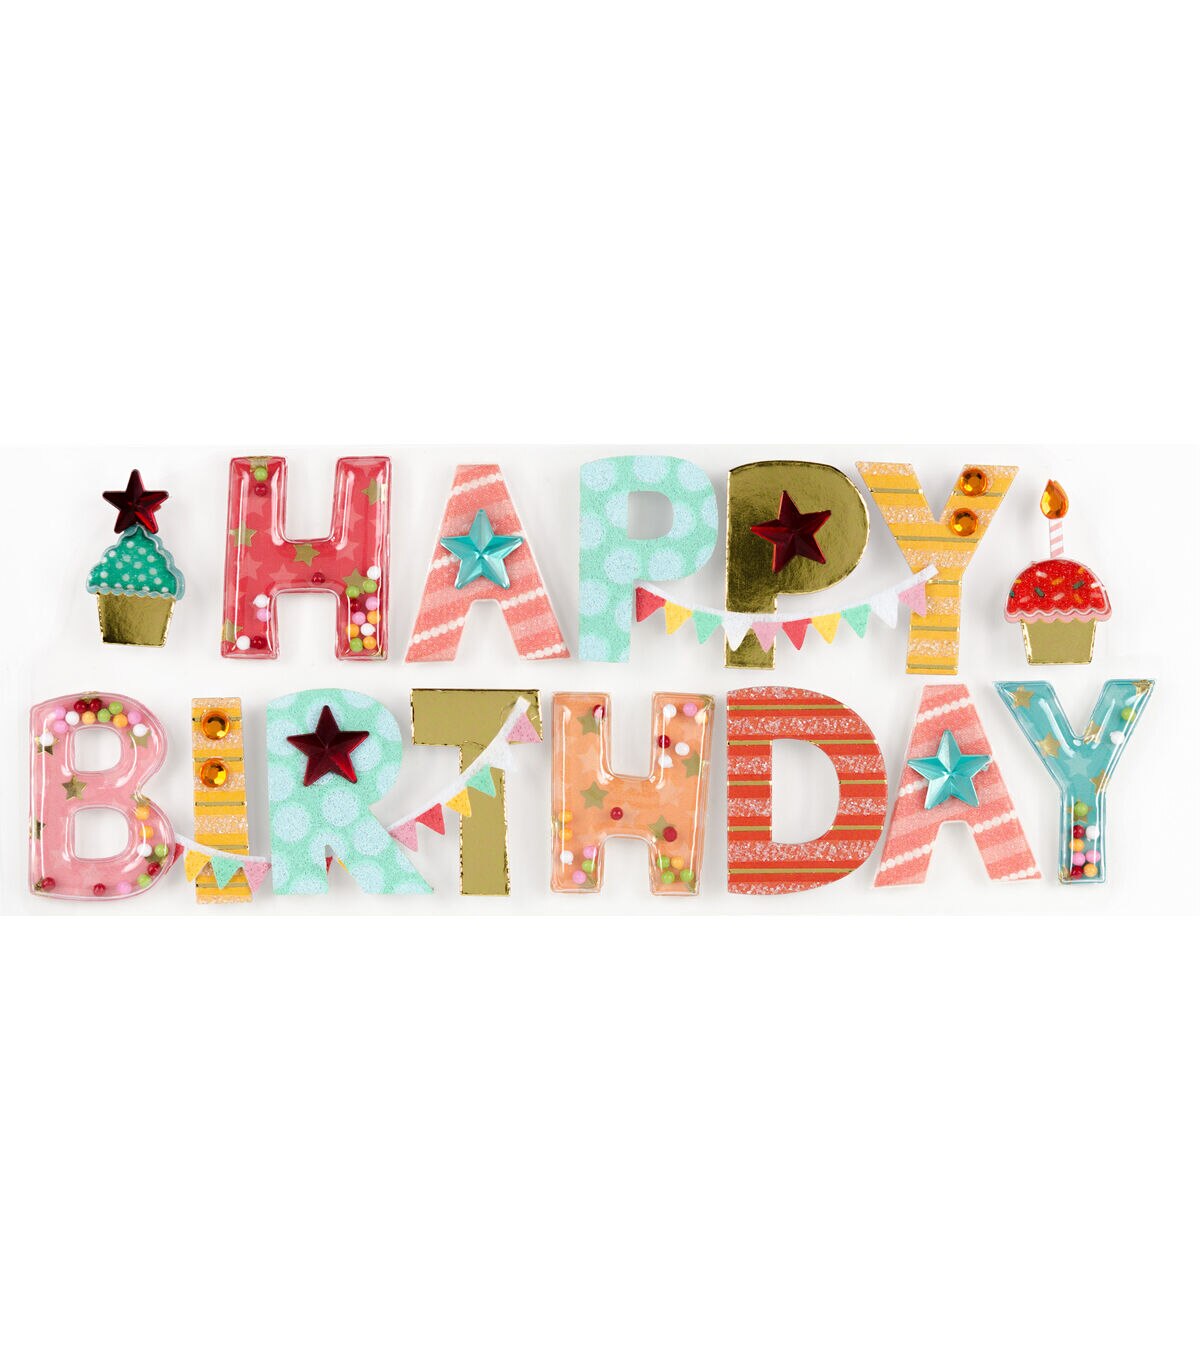 HAPPY BIRTHDAY Cake Candles Jolees Boutique JOLEE'S BOUTIQUE DIMENSIONAL STICKERS 